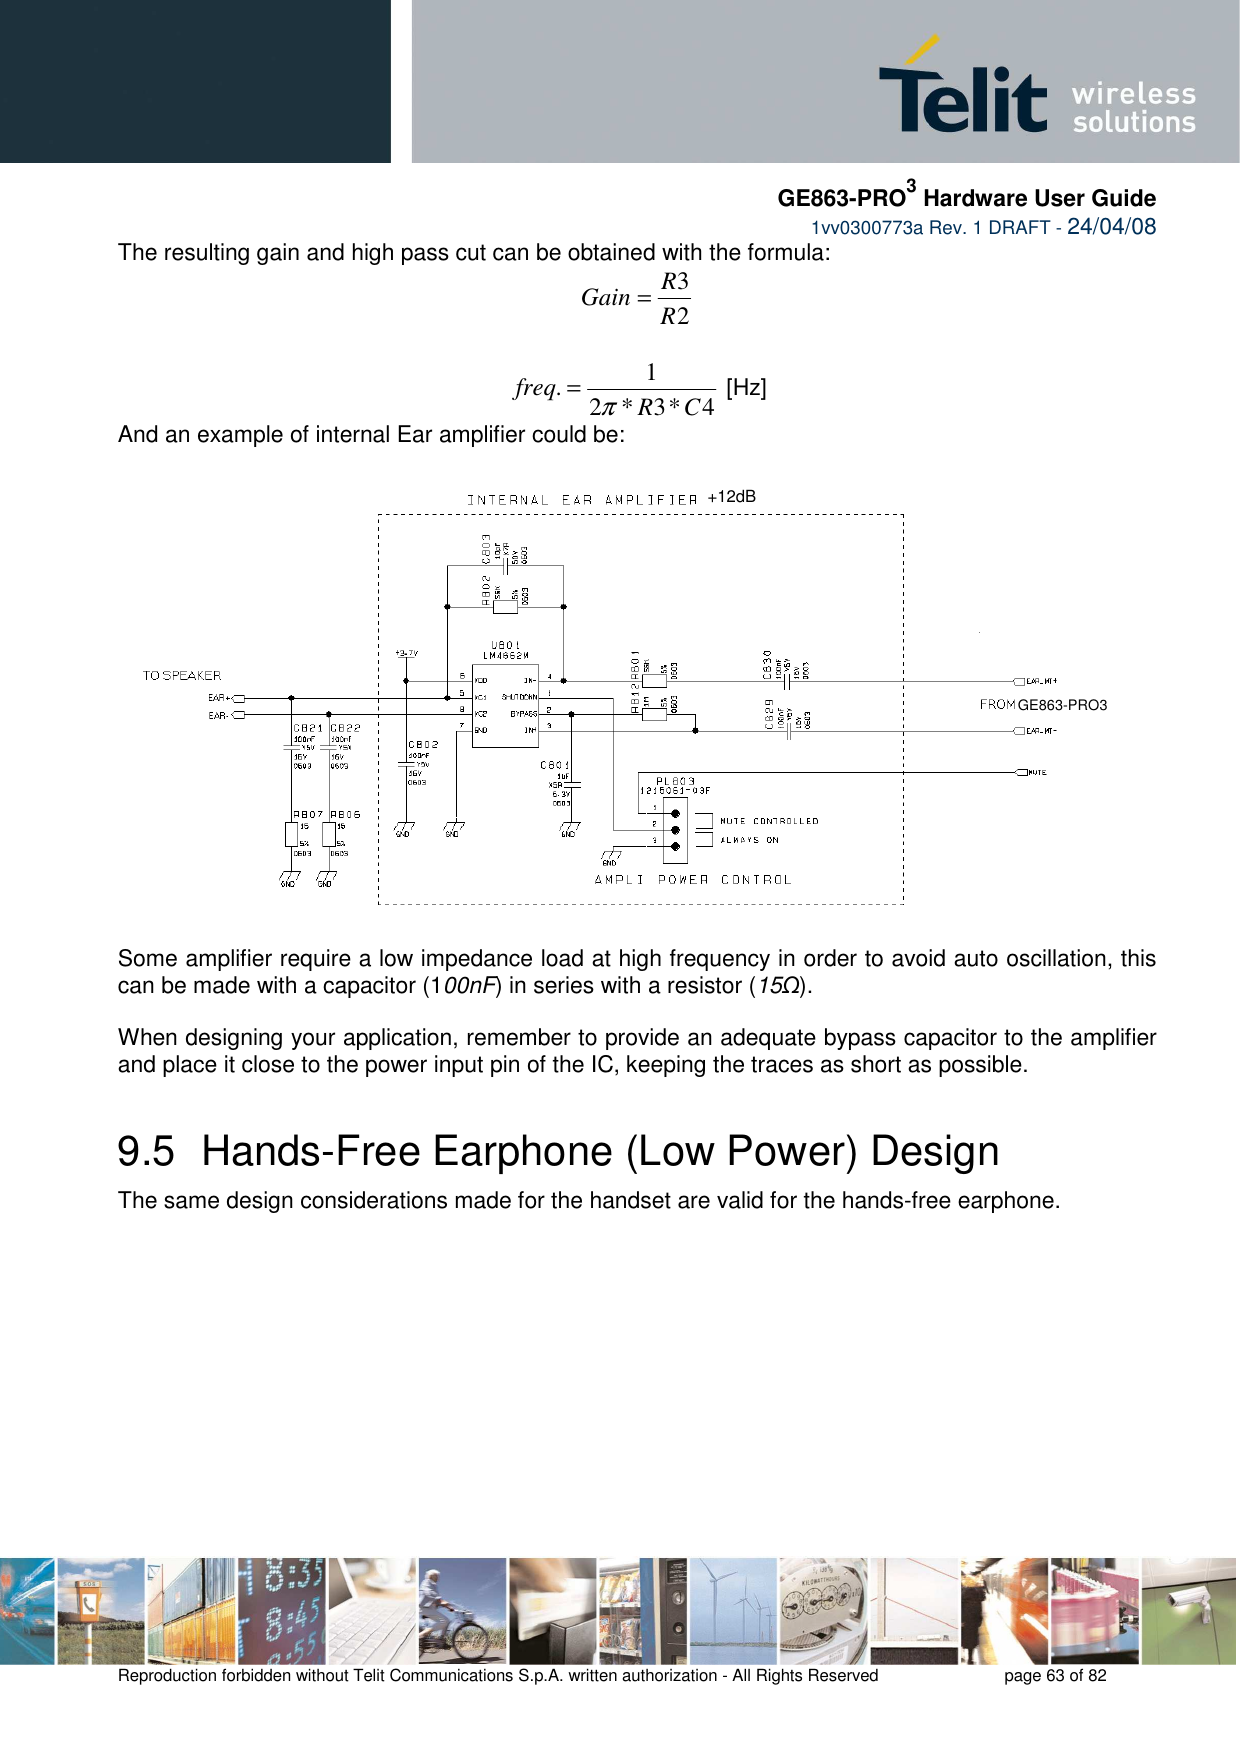     GE863-PRO3 Hardware User Guide  1vv0300773a Rev. 1 DRAFT - 24/04/08    Reproduction forbidden without Telit Communications S.p.A. written authorization - All Rights Reserved    page 63 of 82  The resulting gain and high pass cut can be obtained with the formula: 23RRGain =  4*3*21.CRfreqπ= [Hz] And an example of internal Ear amplifier could be:  Some amplifier require a low impedance load at high frequency in order to avoid auto oscillation, this can be made with a capacitor (100nF) in series with a resistor (15Ω).  When designing your application, remember to provide an adequate bypass capacitor to the amplifier and place it close to the power input pin of the IC, keeping the traces as short as possible. 9.5  Hands-Free Earphone (Low Power) Design The same design considerations made for the handset are valid for the hands-free earphone. +12dB GE863-PRO3 